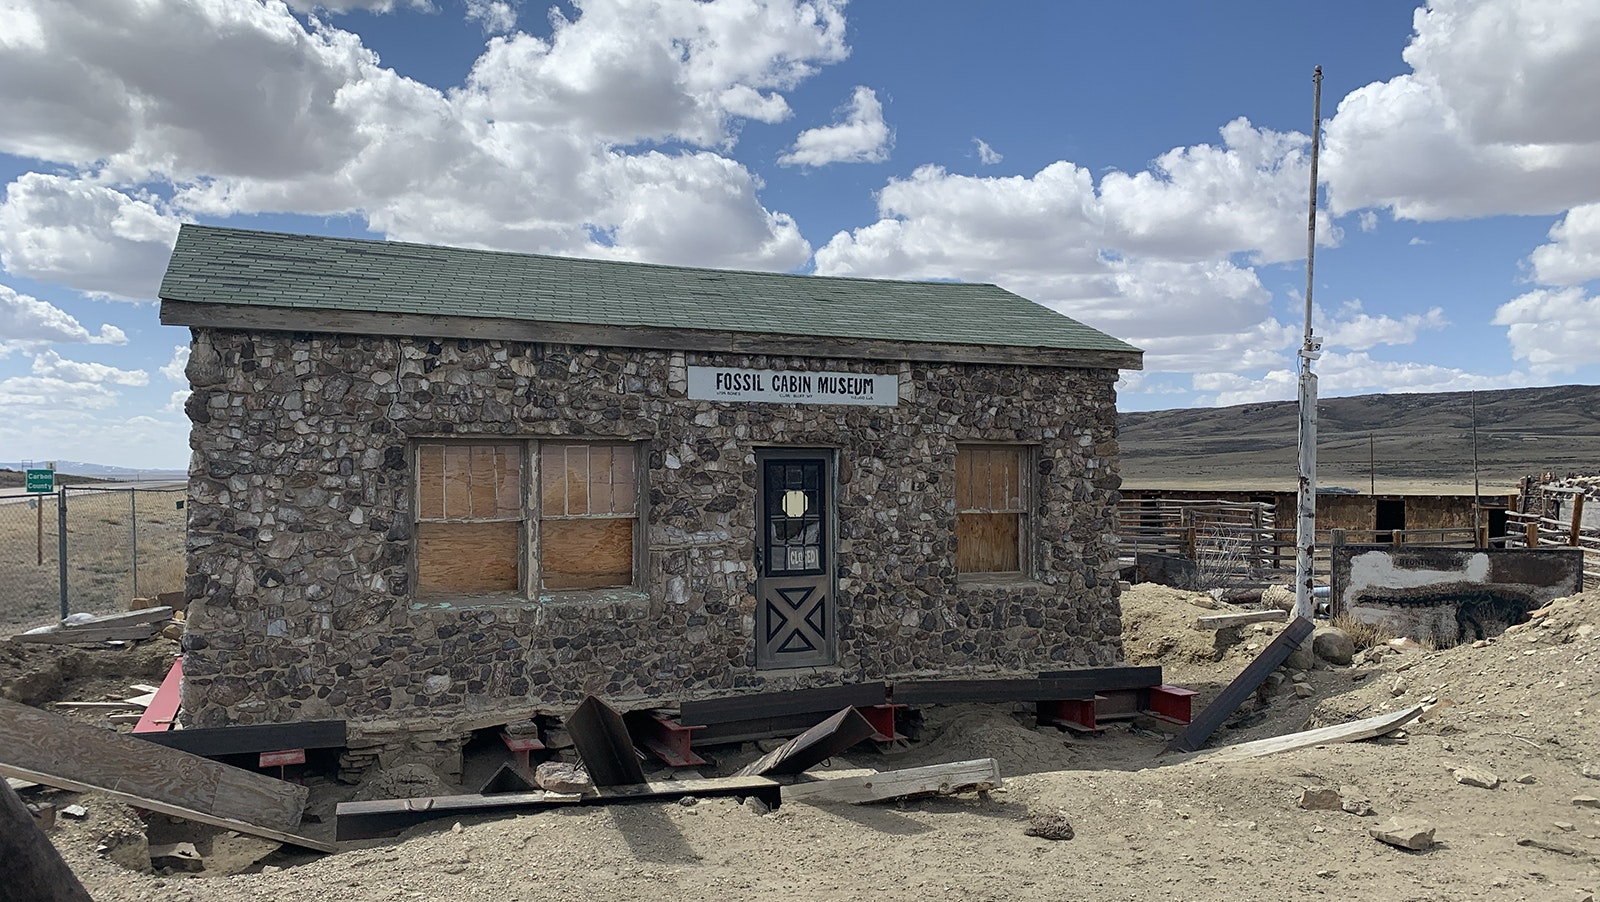 The Wyoming Fossil Cabin was supposed to be moved in 2018 from its current site along a remote section of Wyoming Highway 30 into Medicine Bow. But the project stalled, leaving the cabin resting awkwardly on beams.